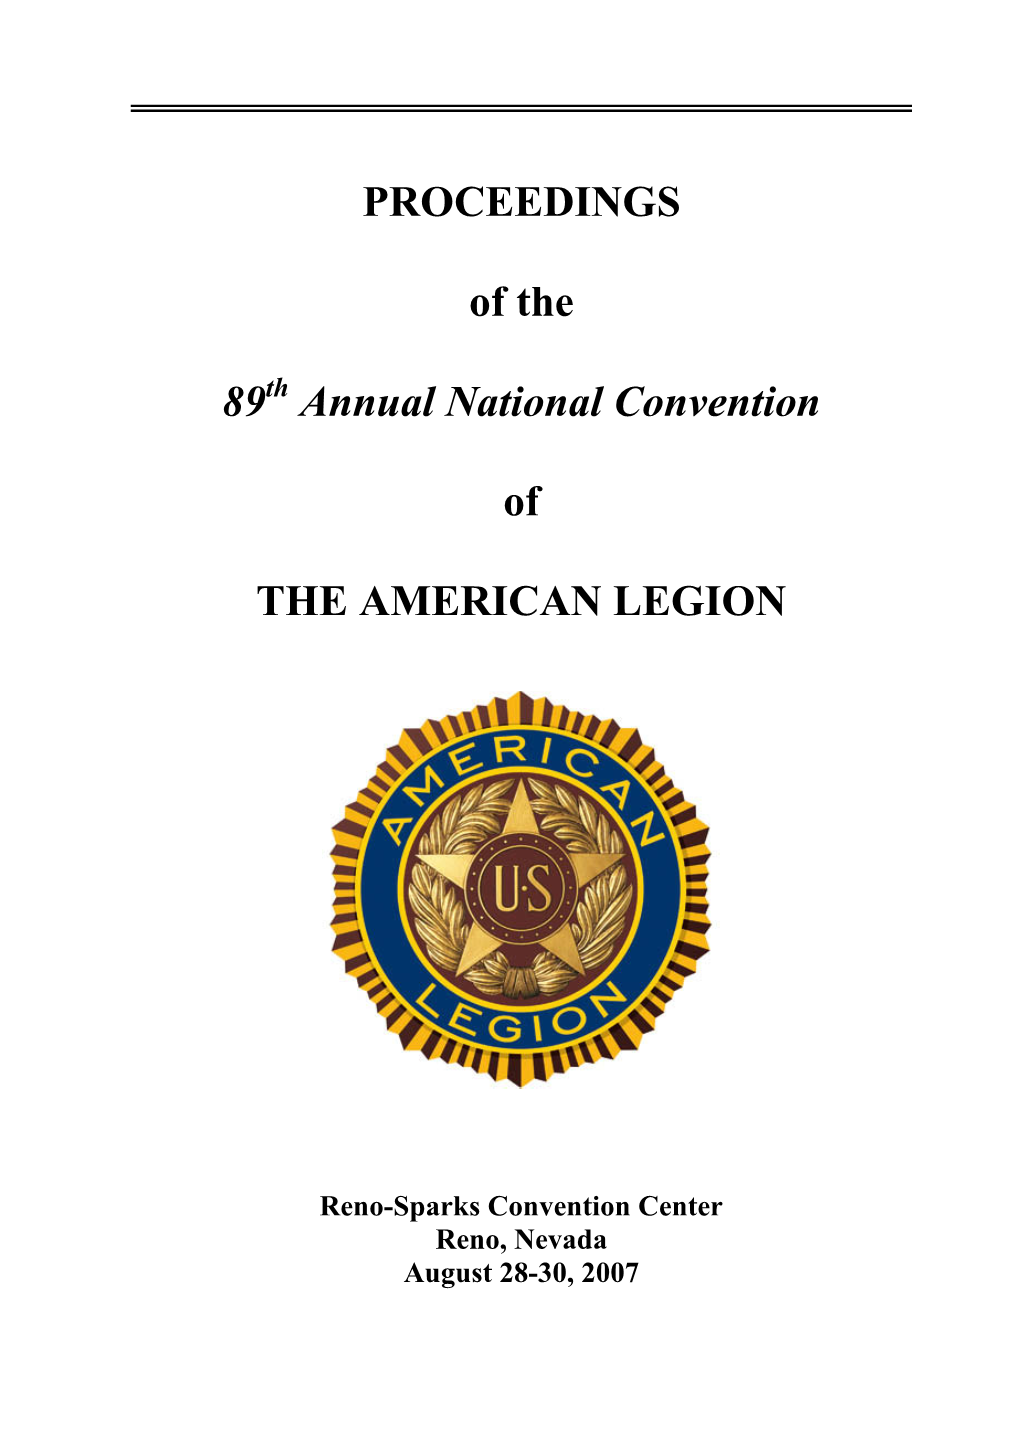 PROCEEDINGS of the 89Th Annual National Convention of THE